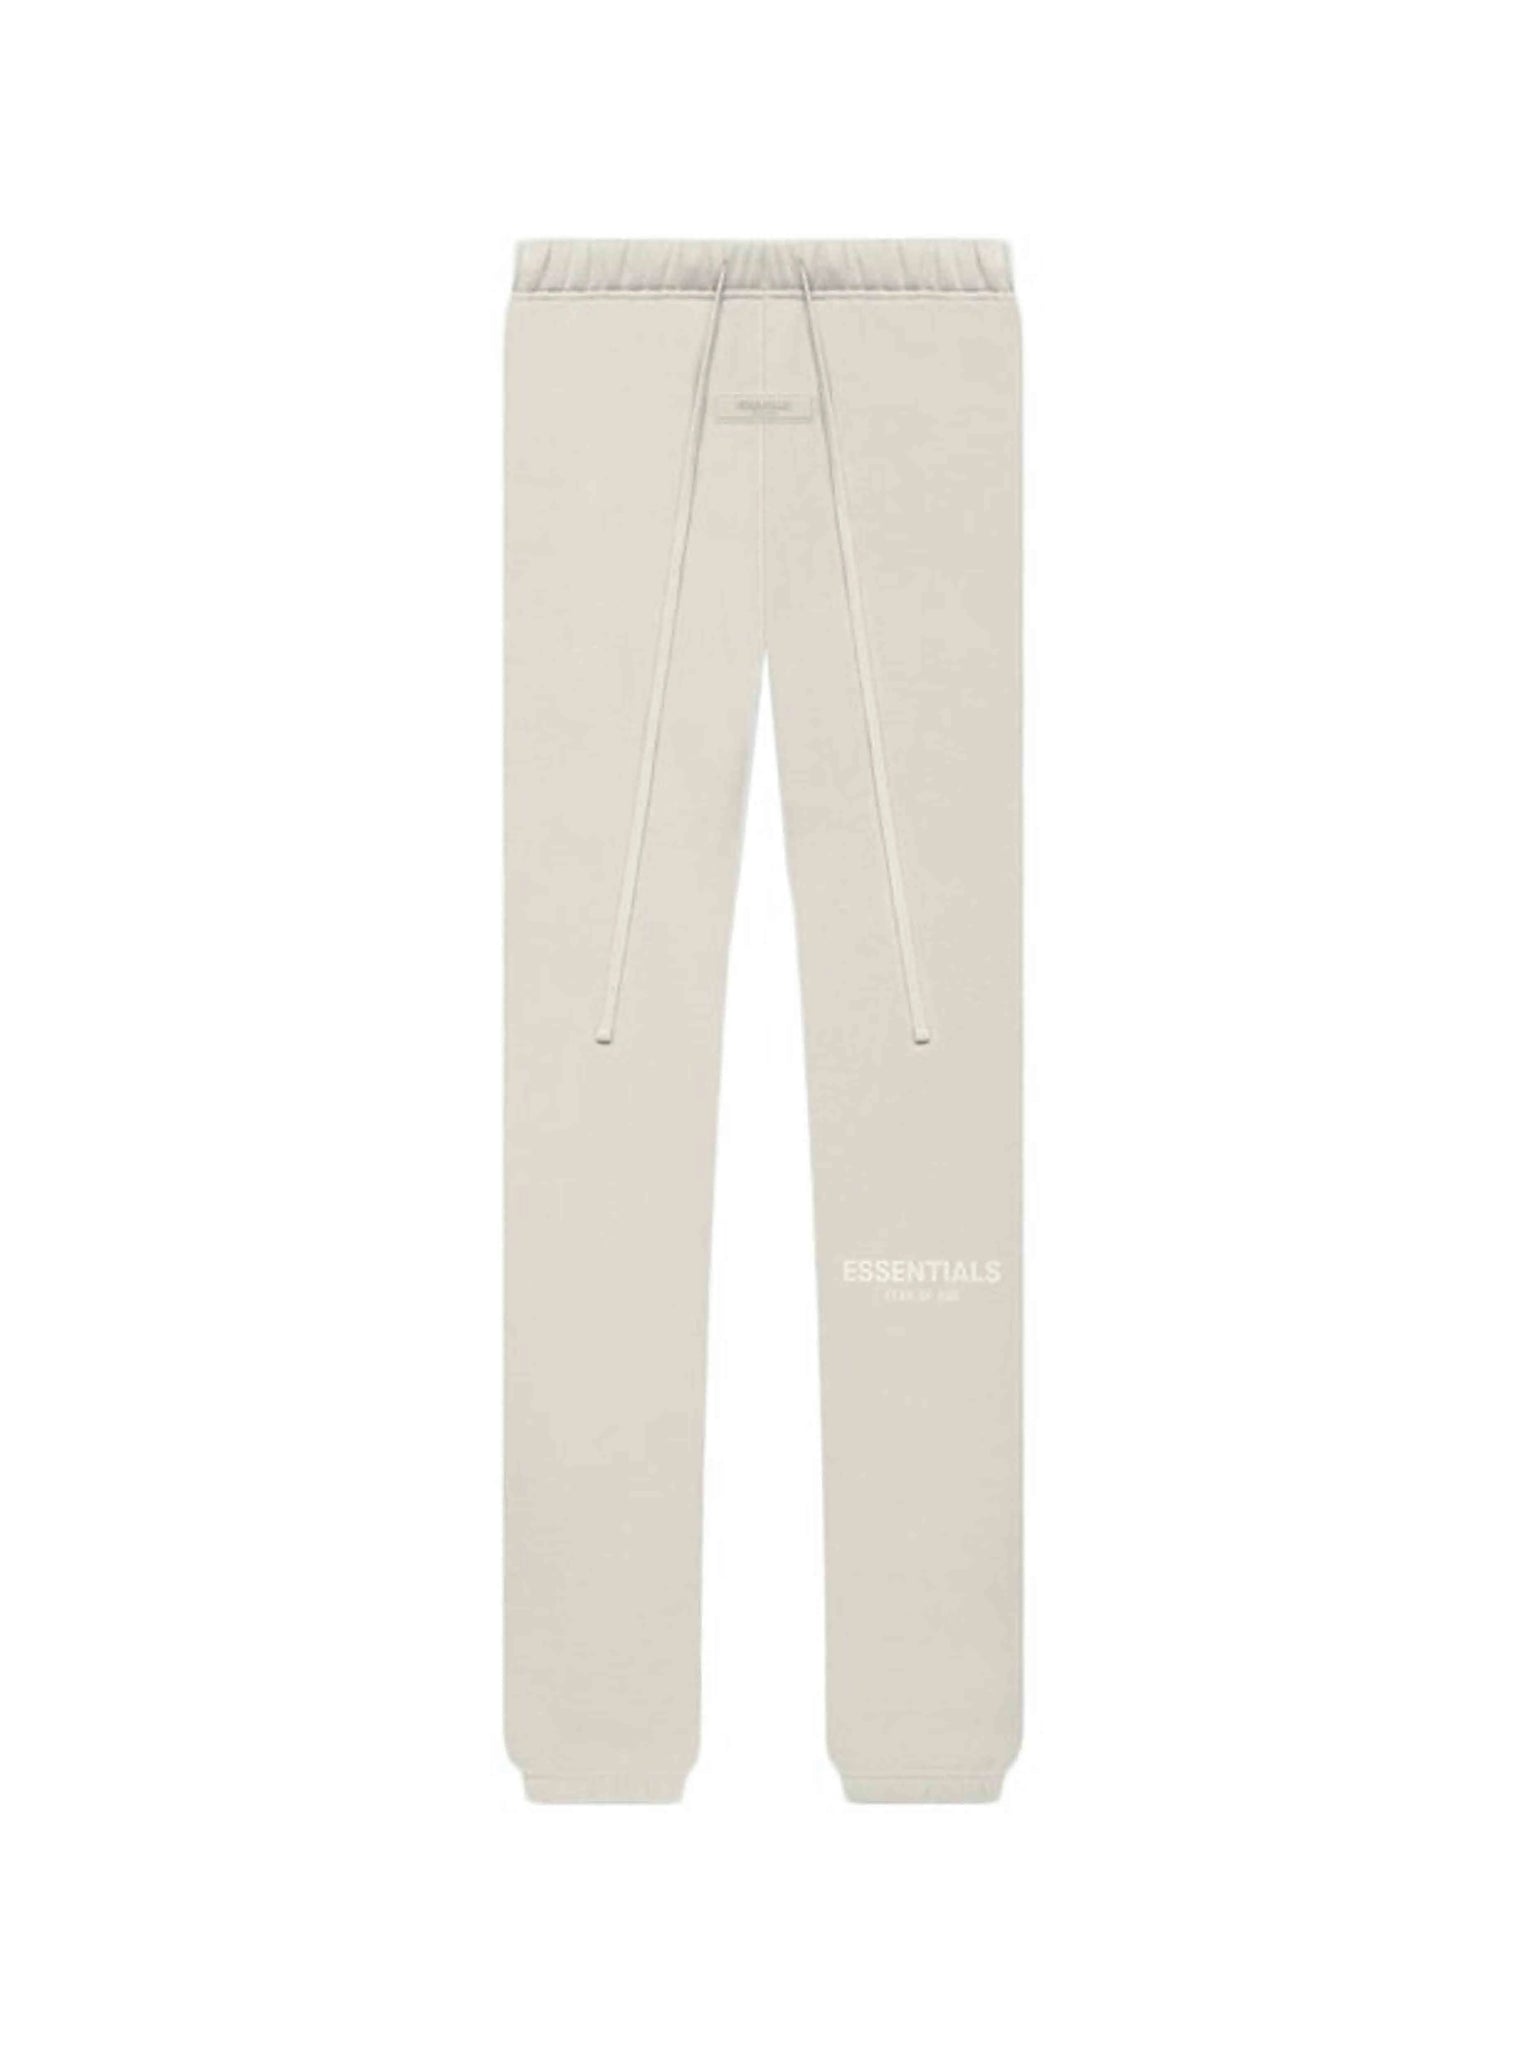 Fear Of God Essentials Sweatpants Wheat [SS22] Prior